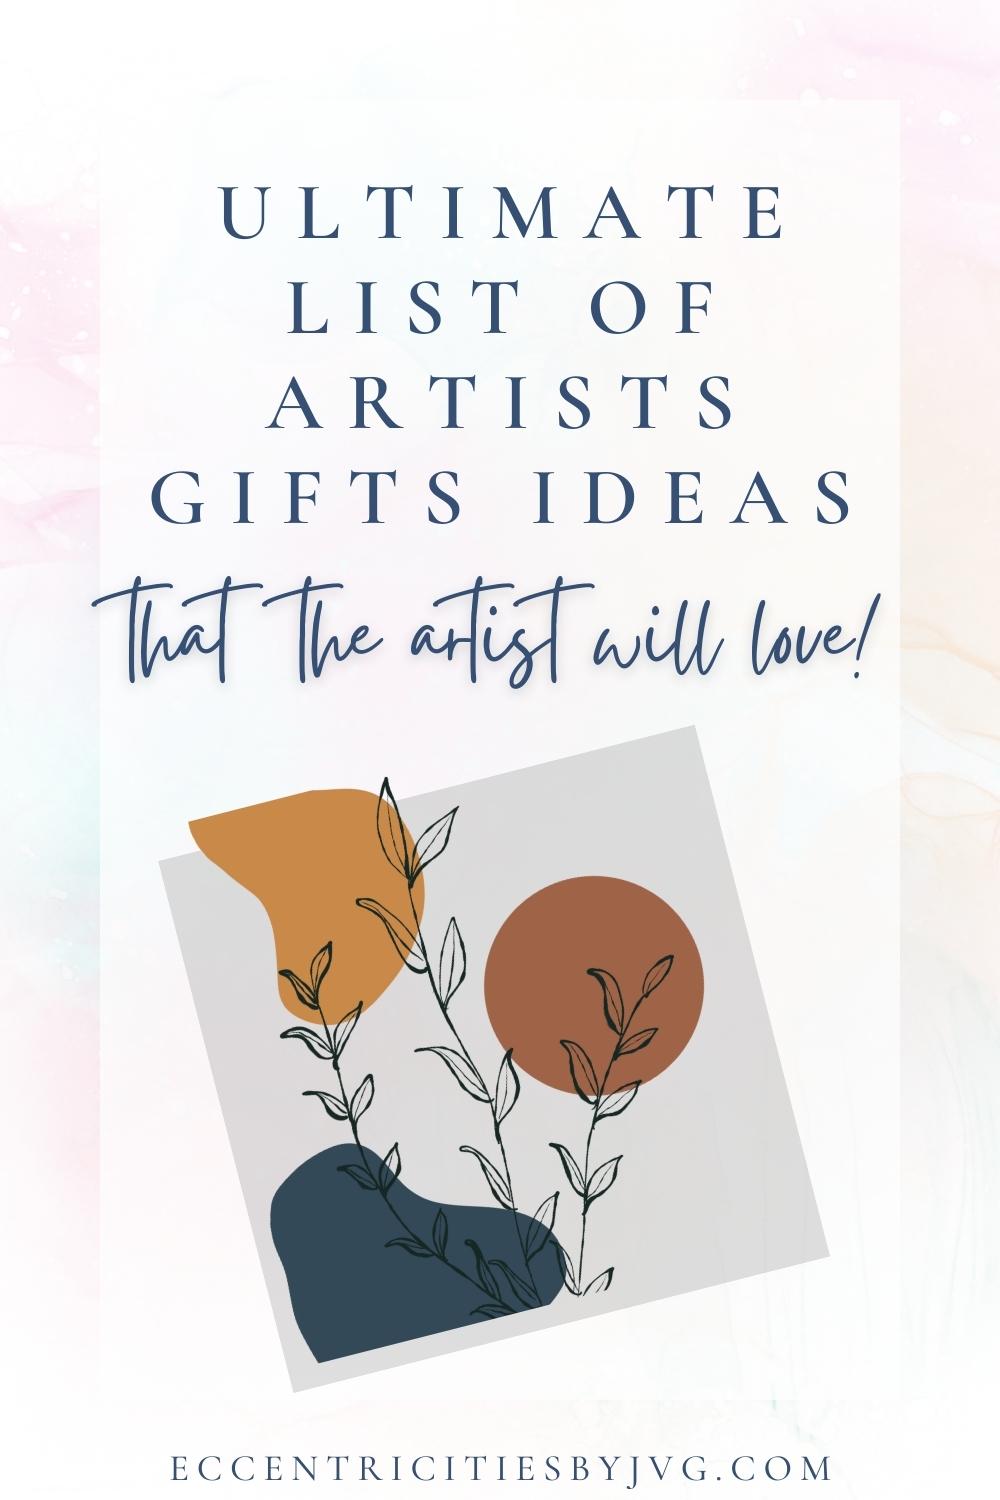 10 Unique Gifts For Artists | Jerry's Artarama